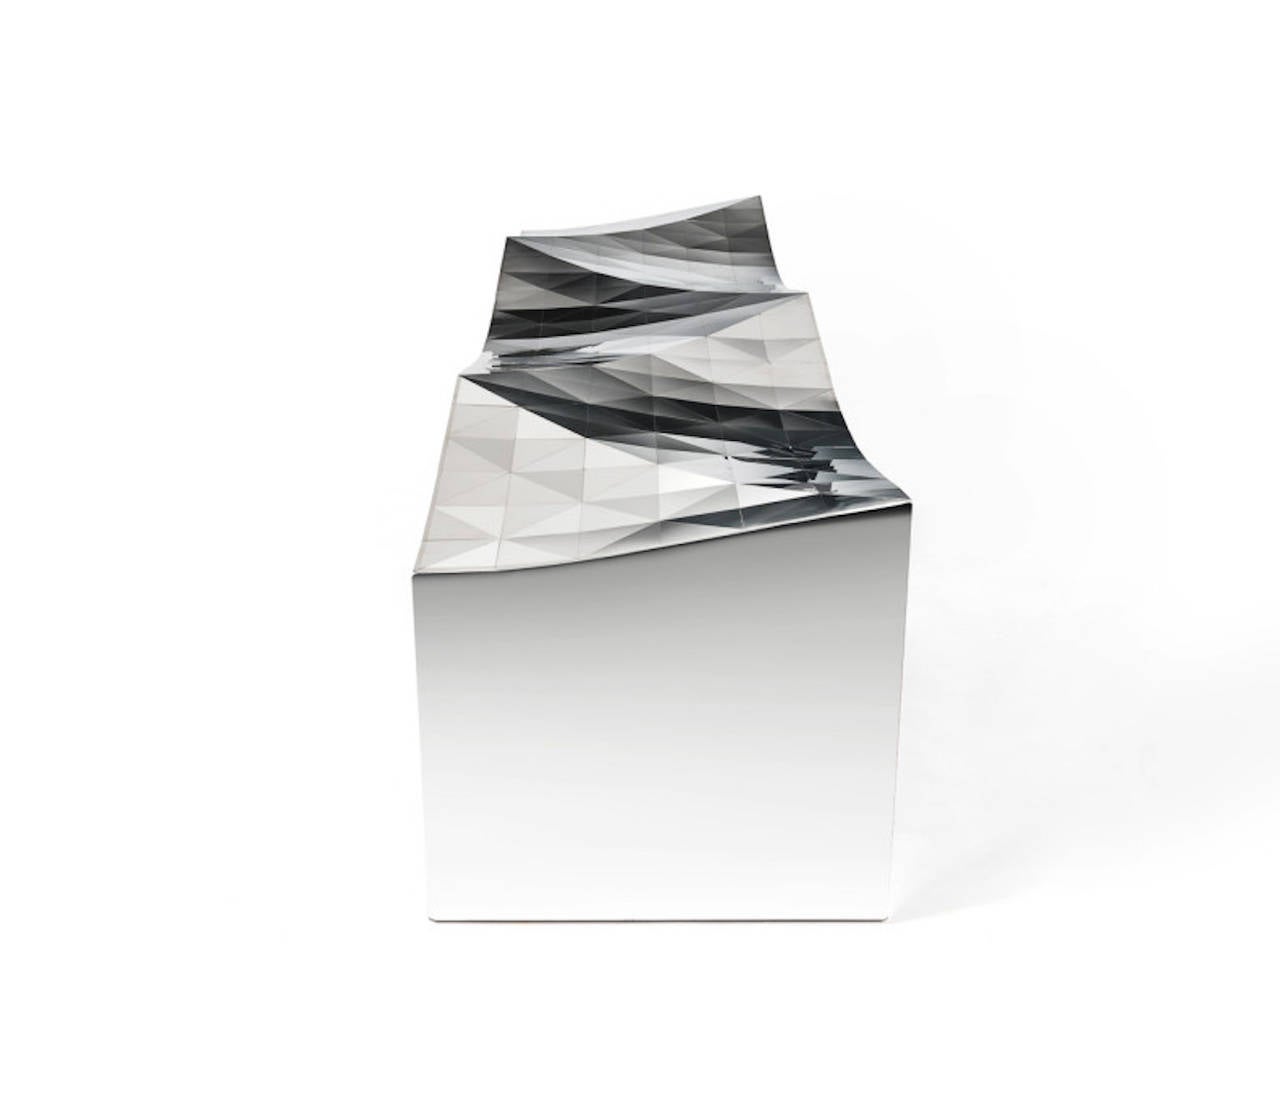 Chinese Wave Bench in Mirror Finish Stainless Steel by Zhoujie Zhang